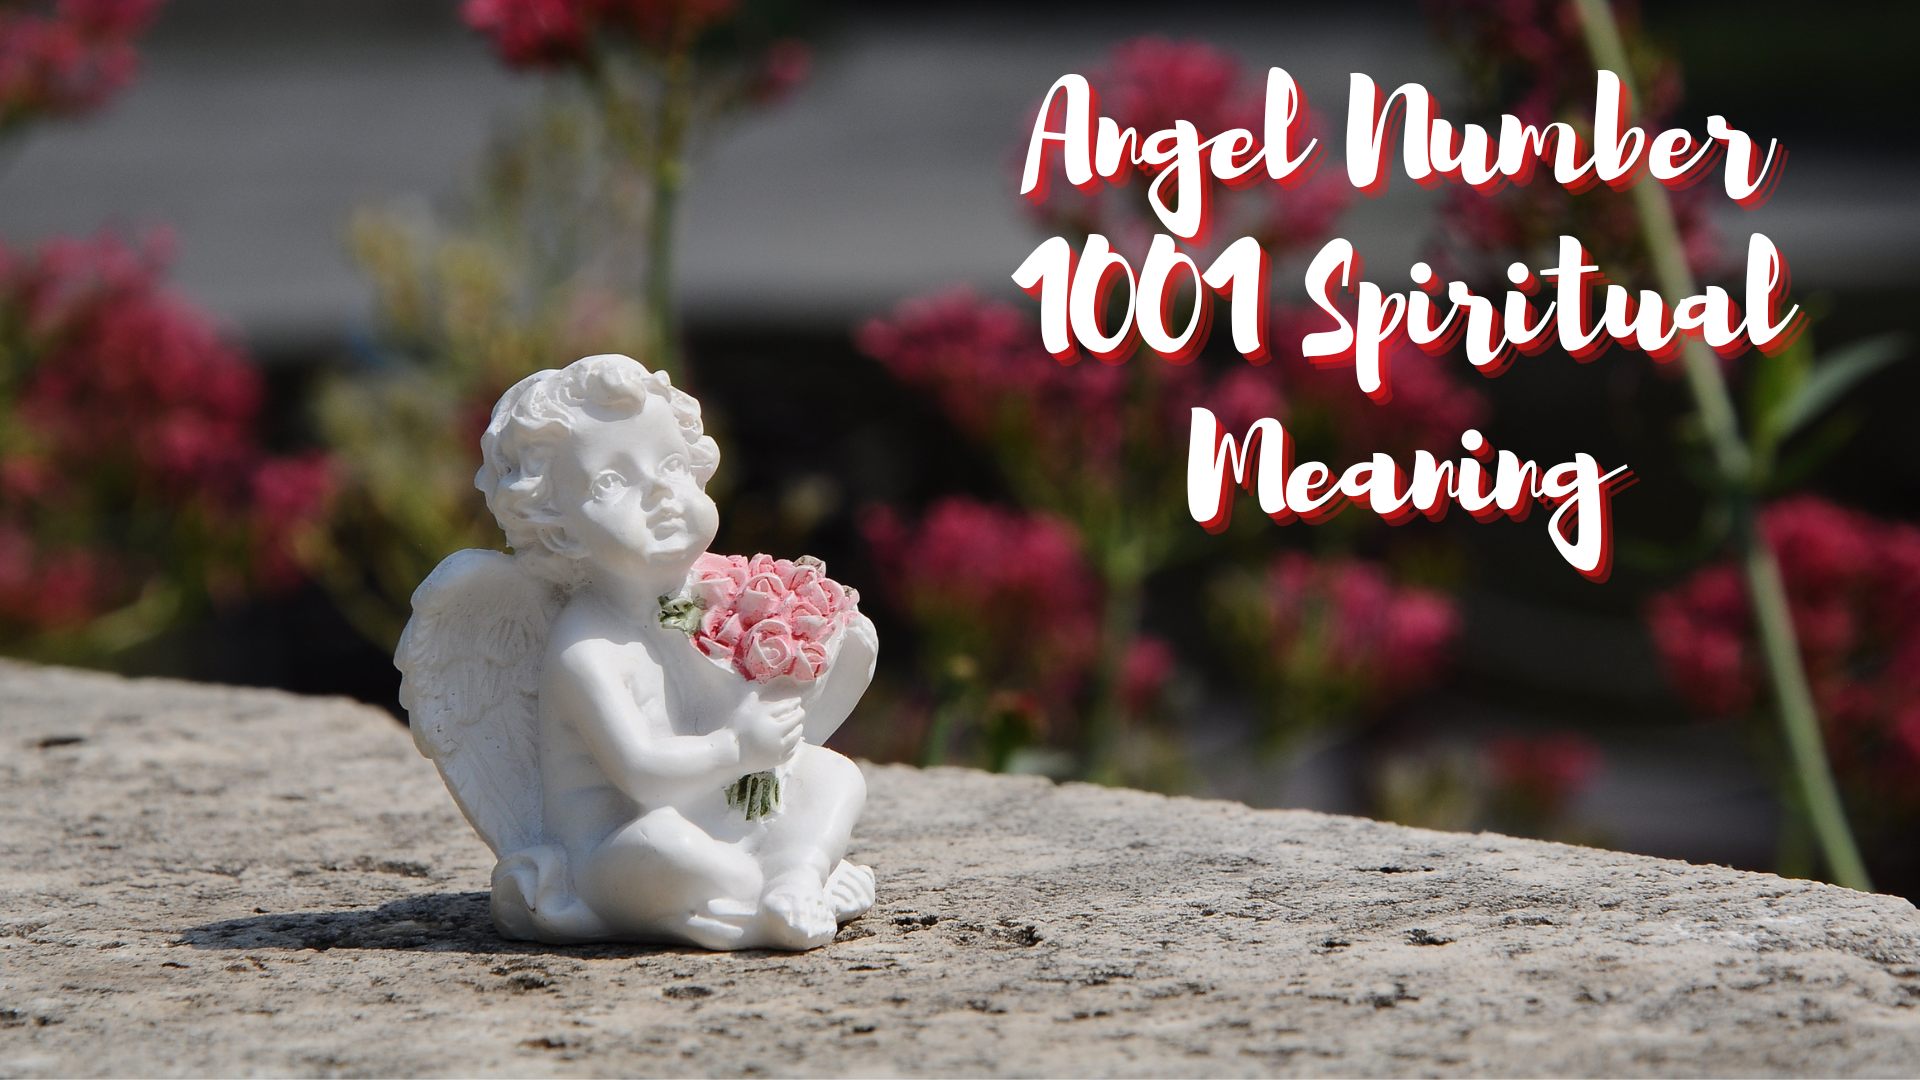 A cute angel figurine holding a pink flower with words Angel Number 1001 Spiritual Meaning